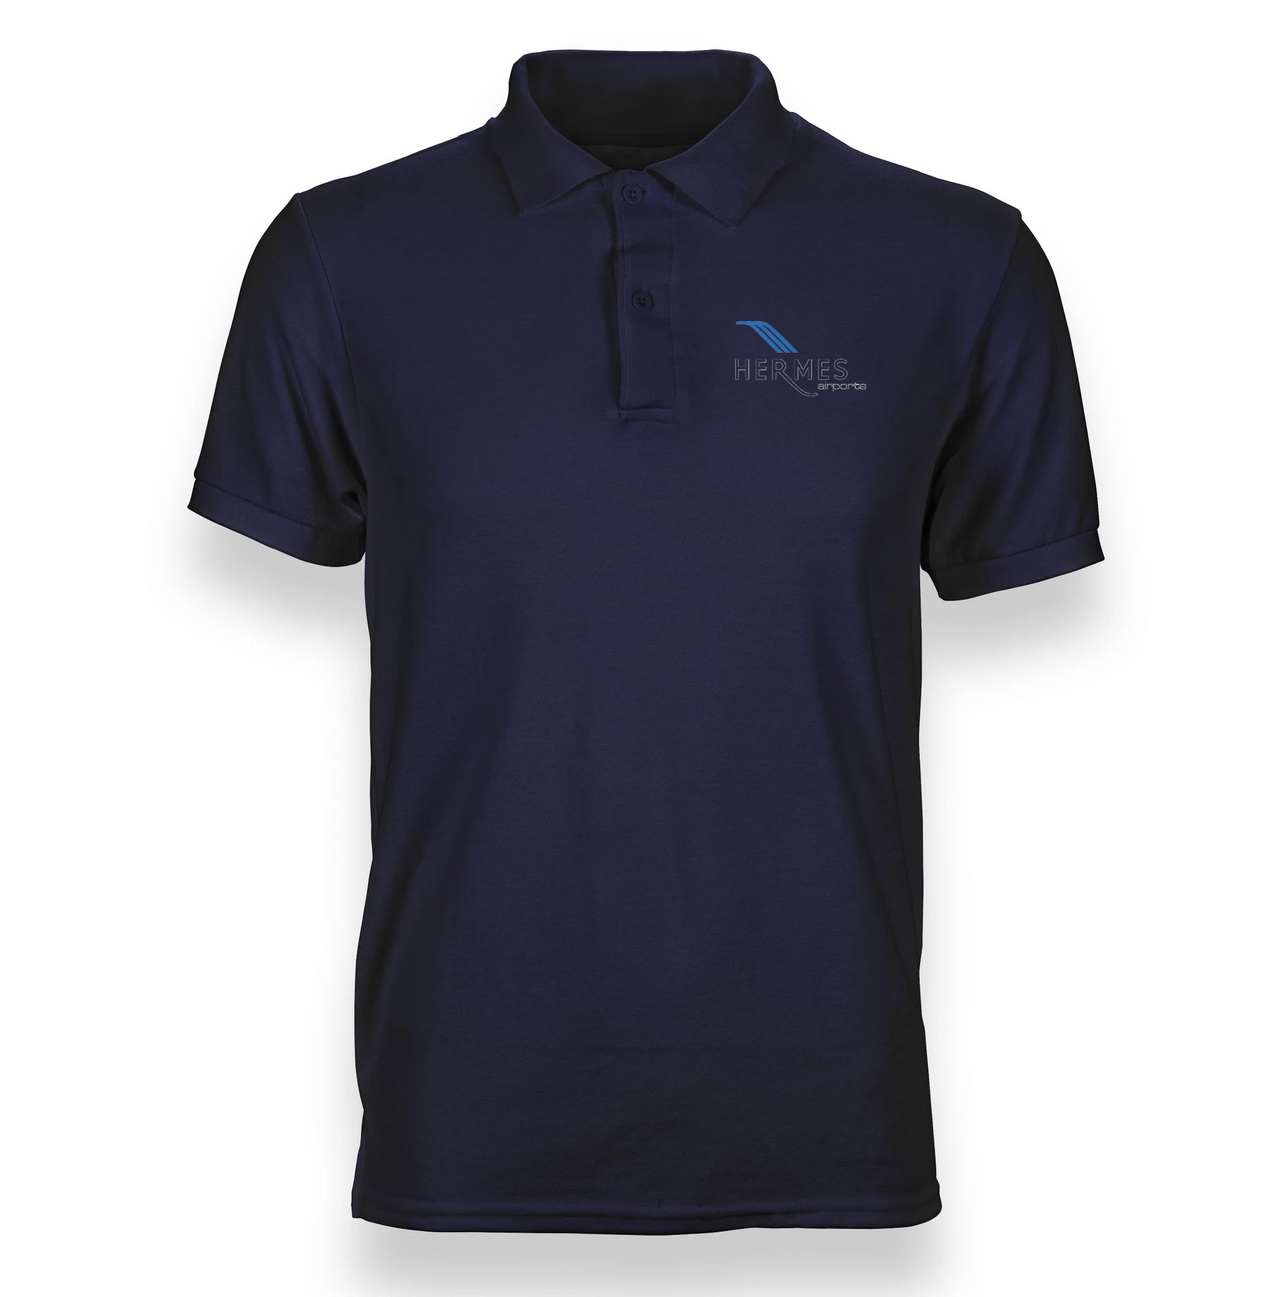 HERMES AIRLINES POLO T-SHIRT